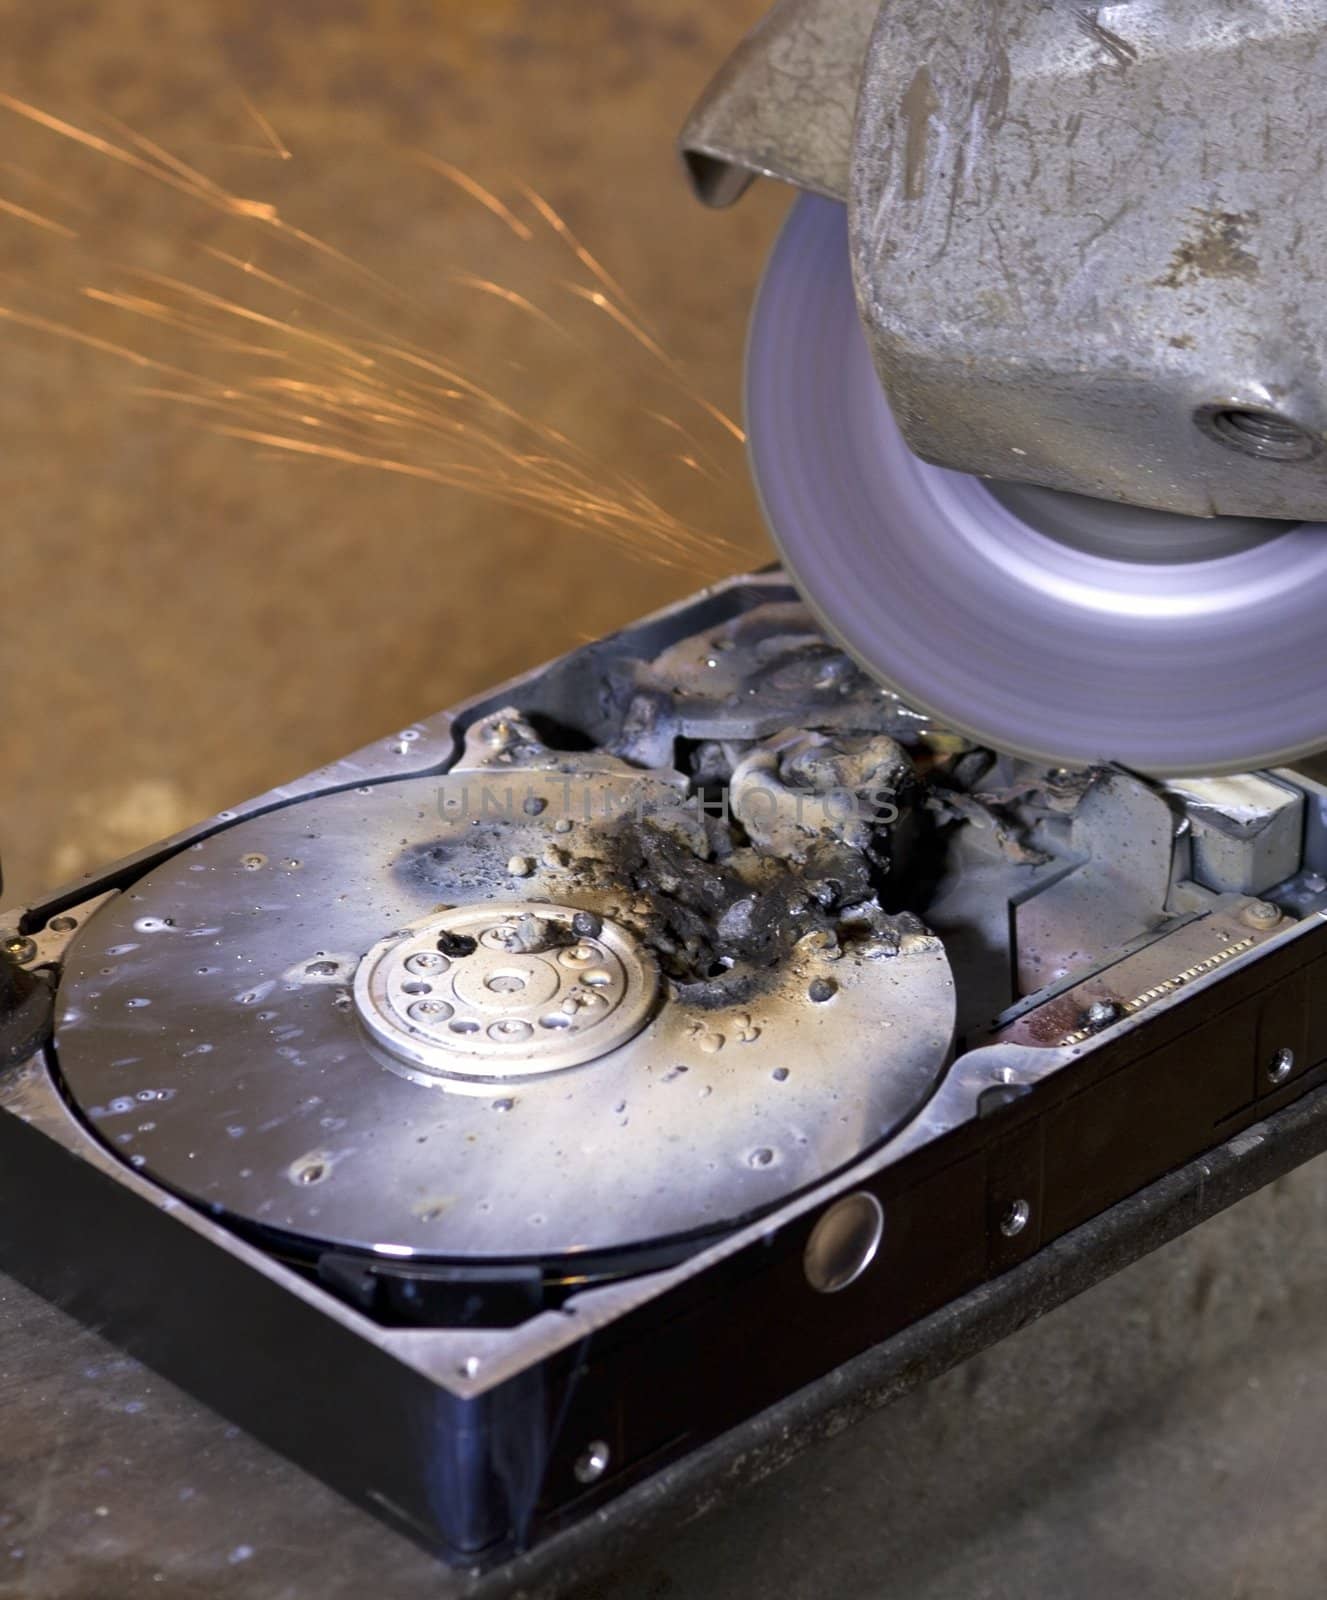 destroyed hard drive with angle grinder